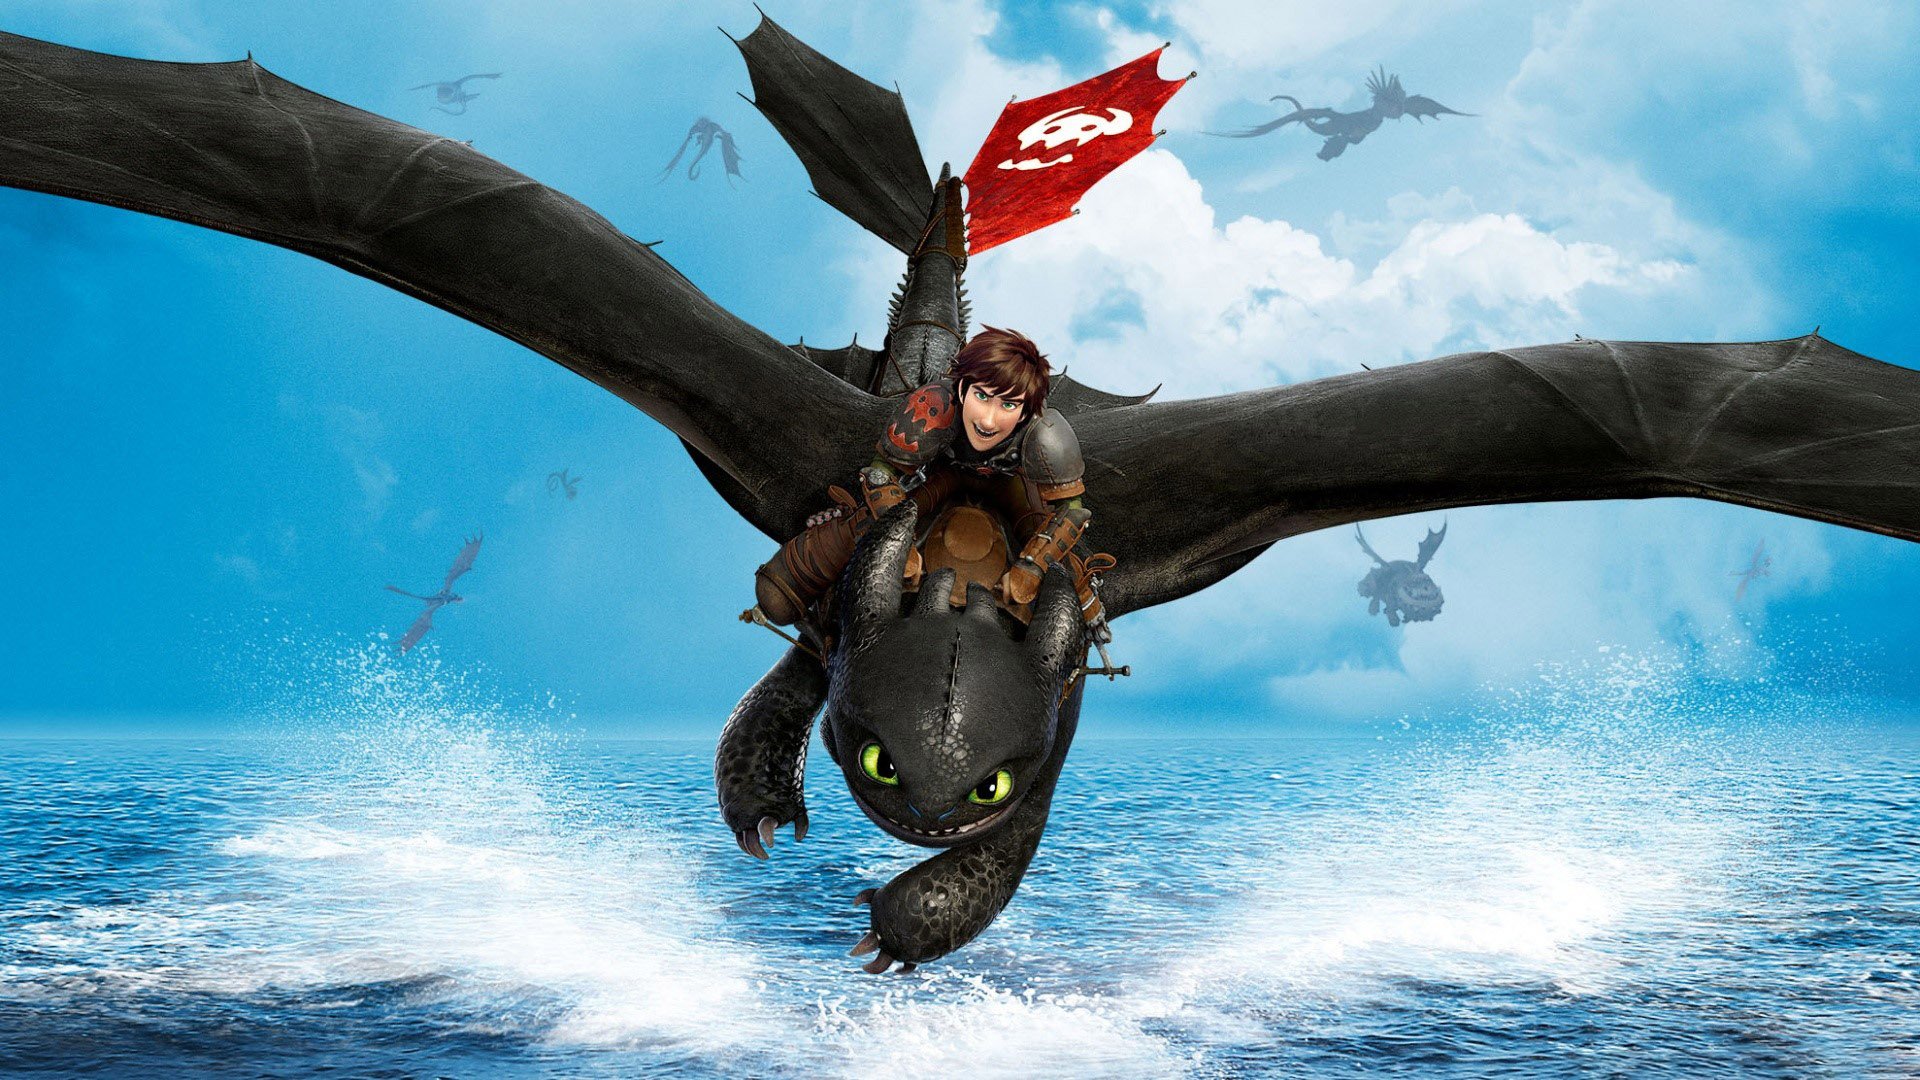 Wallpaper How to train your dragon 2